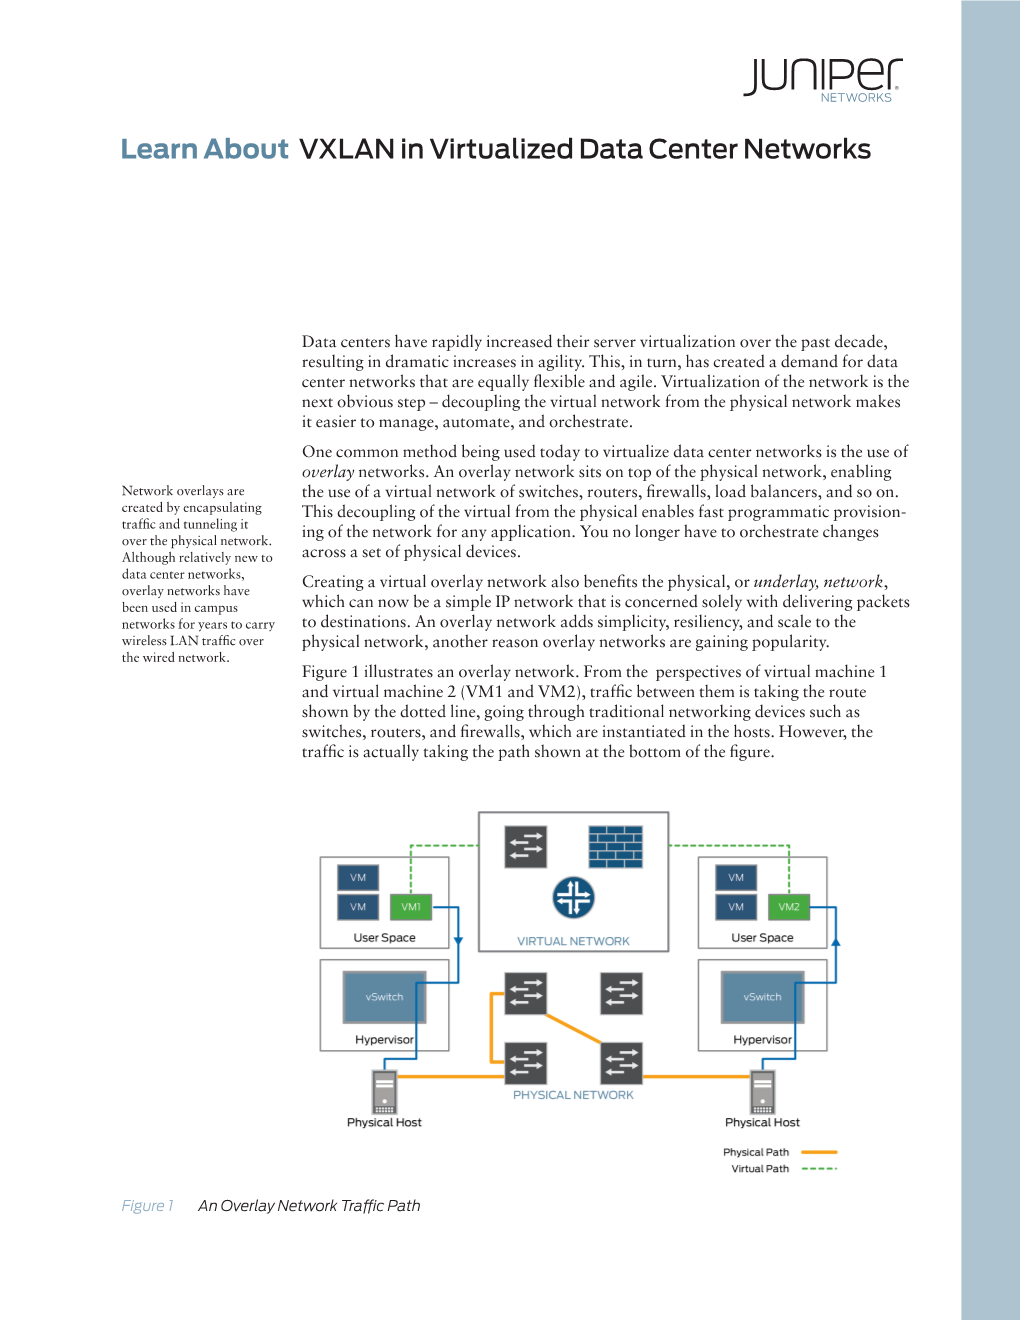 Learn About VXLAN in Virtualized Data Center Networks